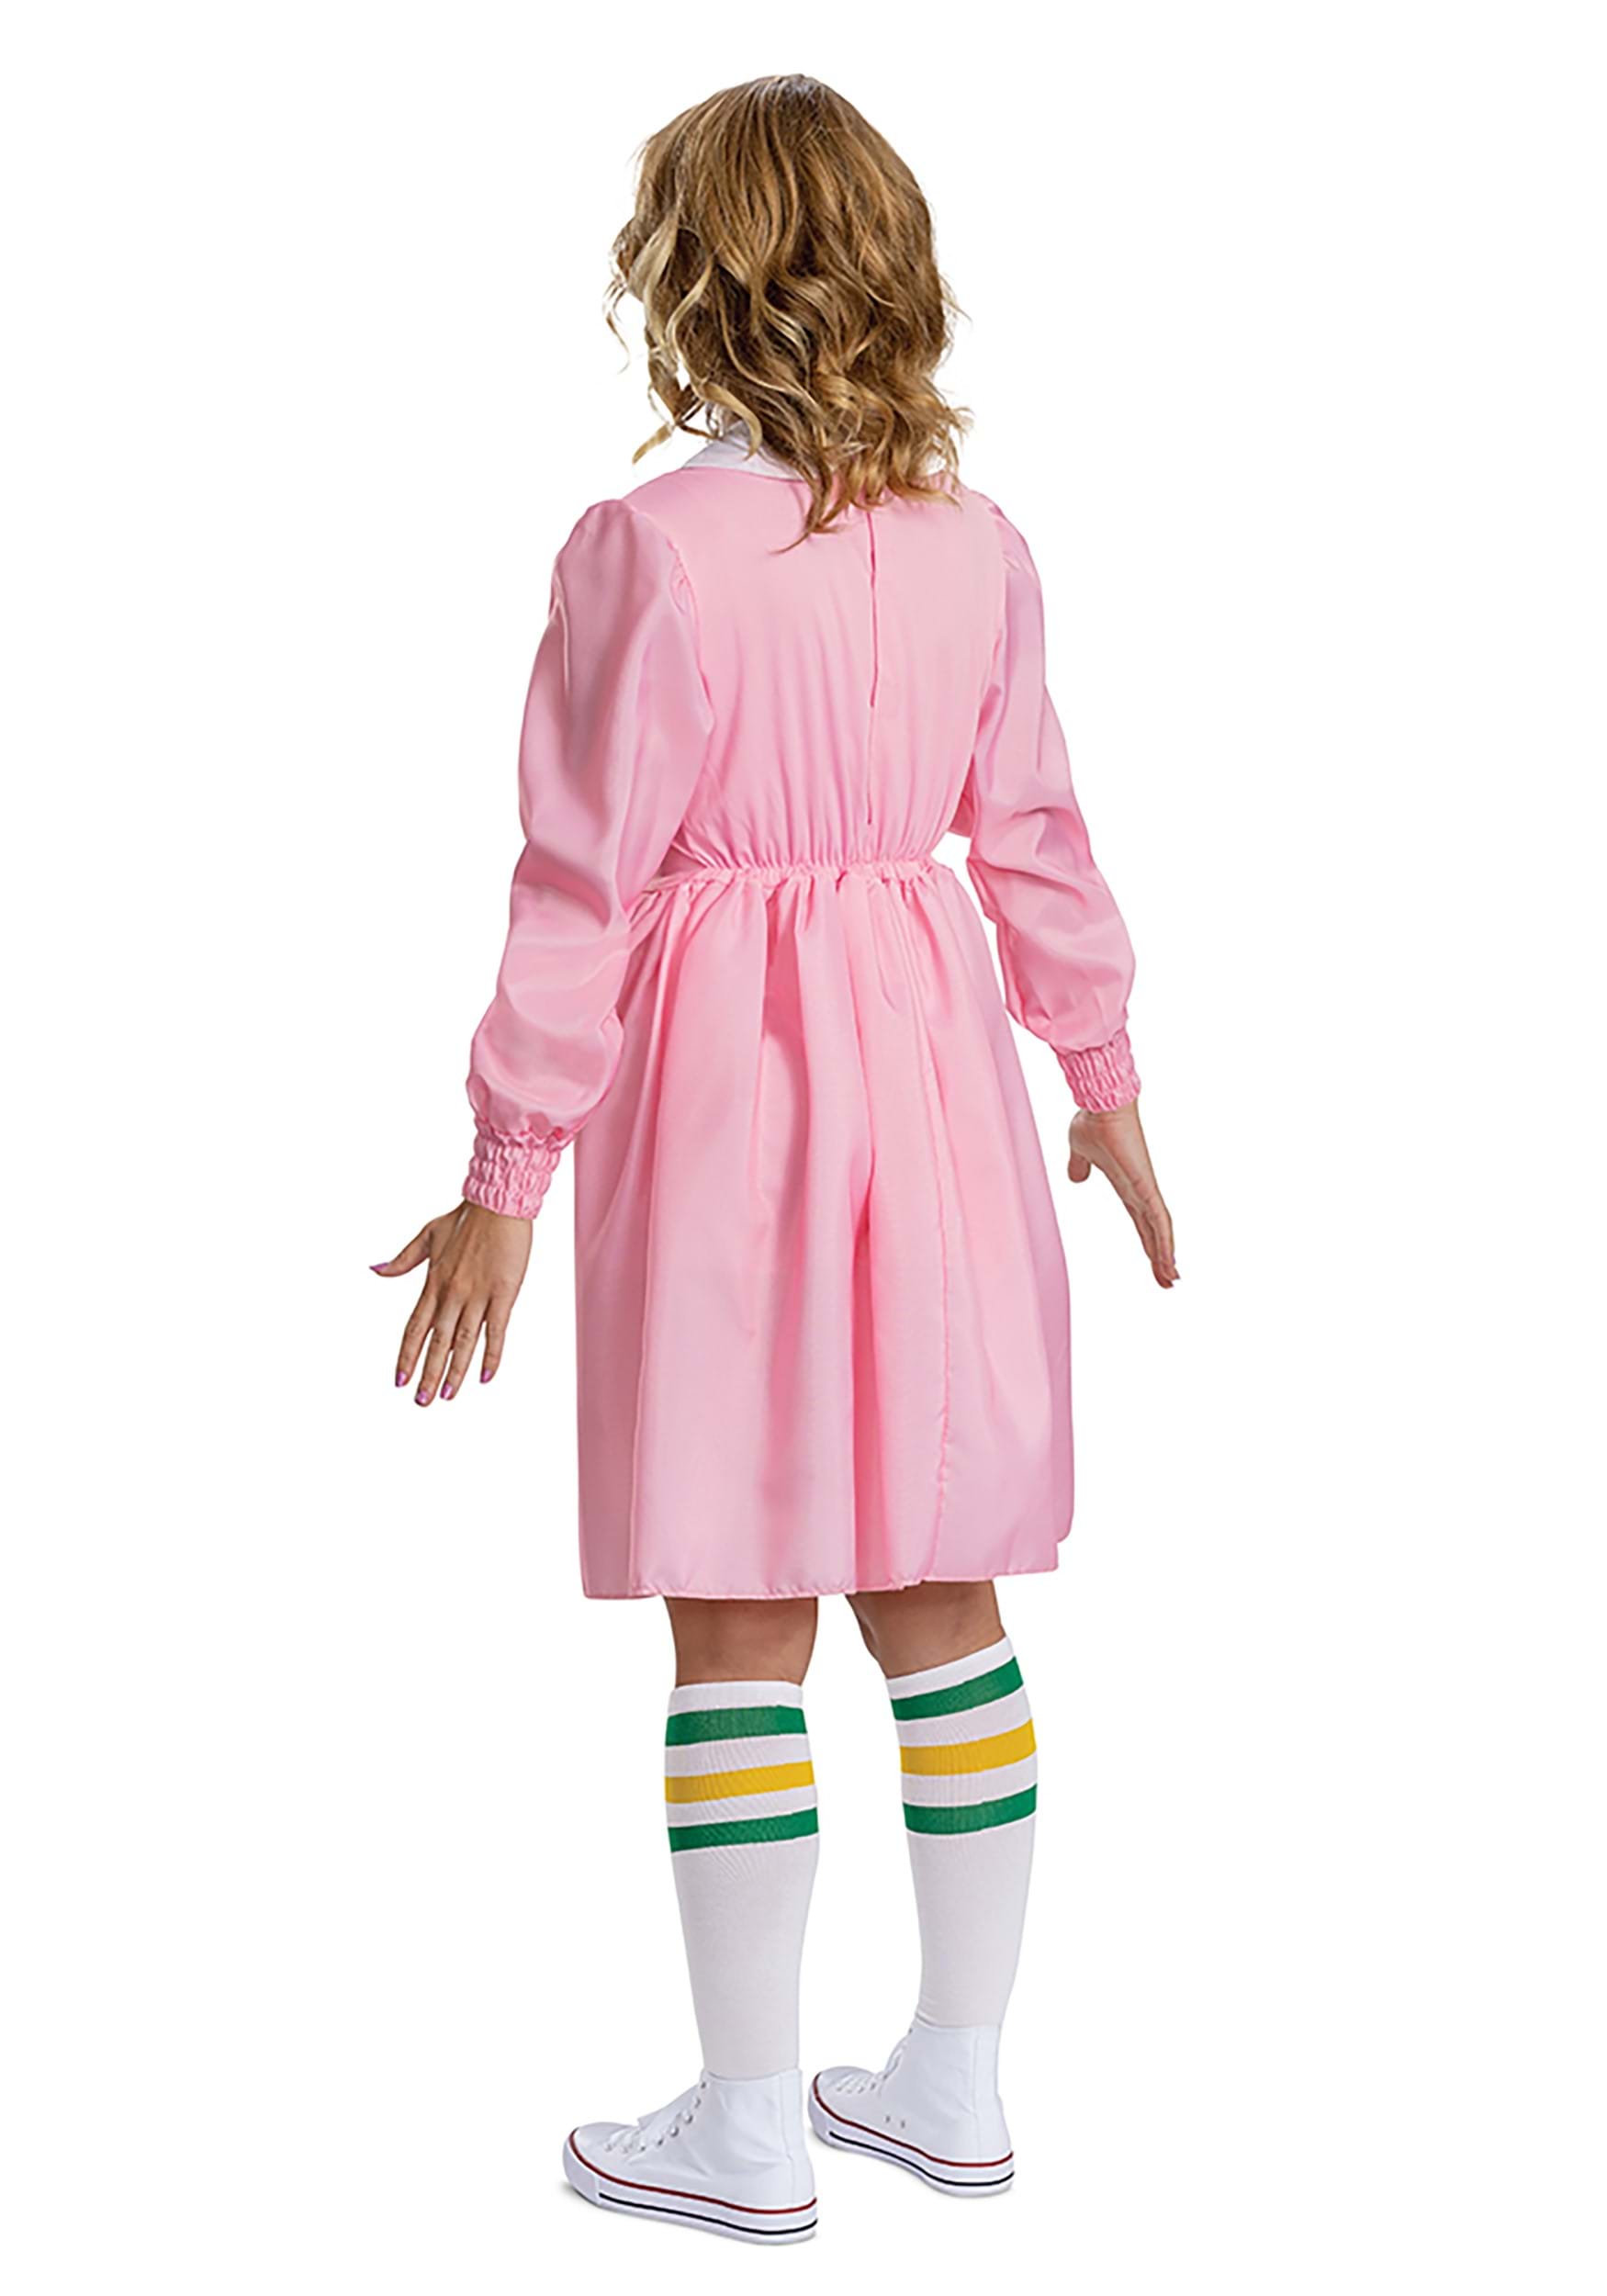 Eleven Women's Stranger Things Adult Deluxe Pink Dress